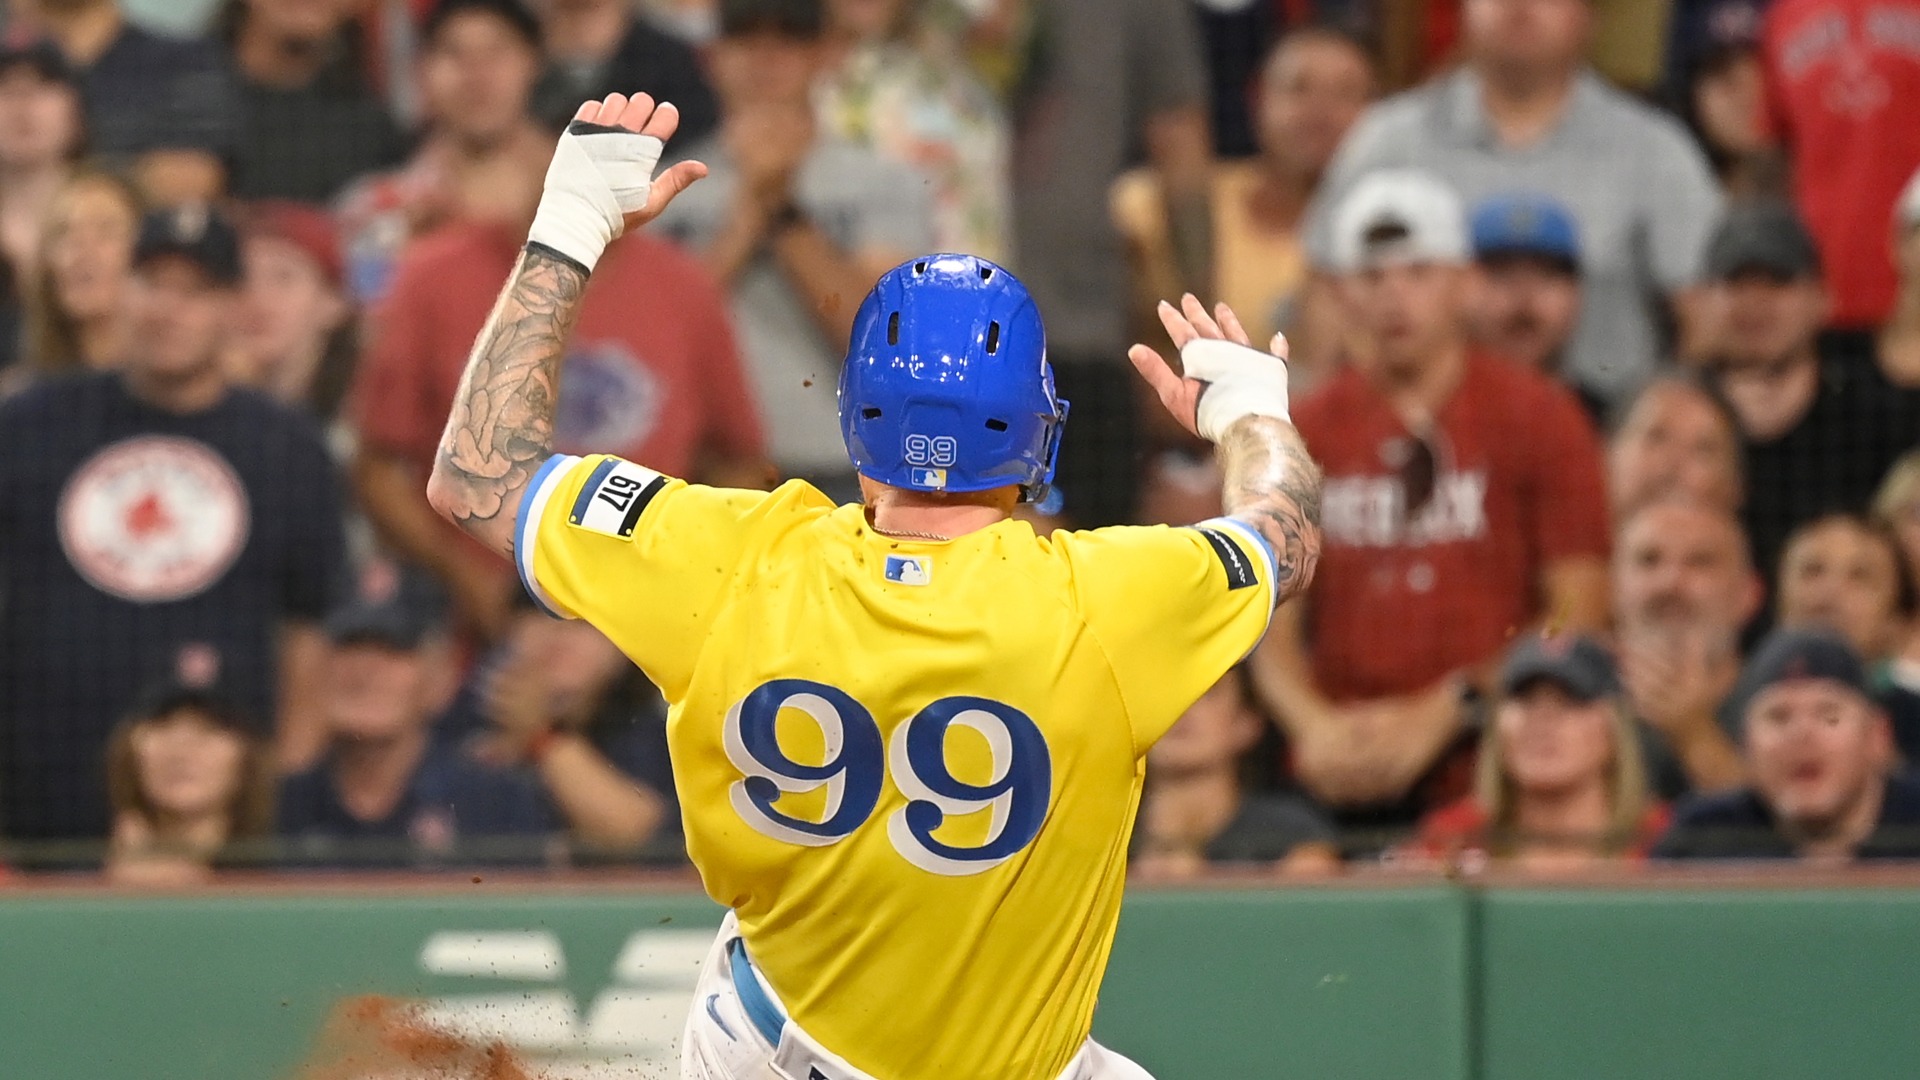 Alex Verdugo drives in two runs in Red Sox's win vs. Royals